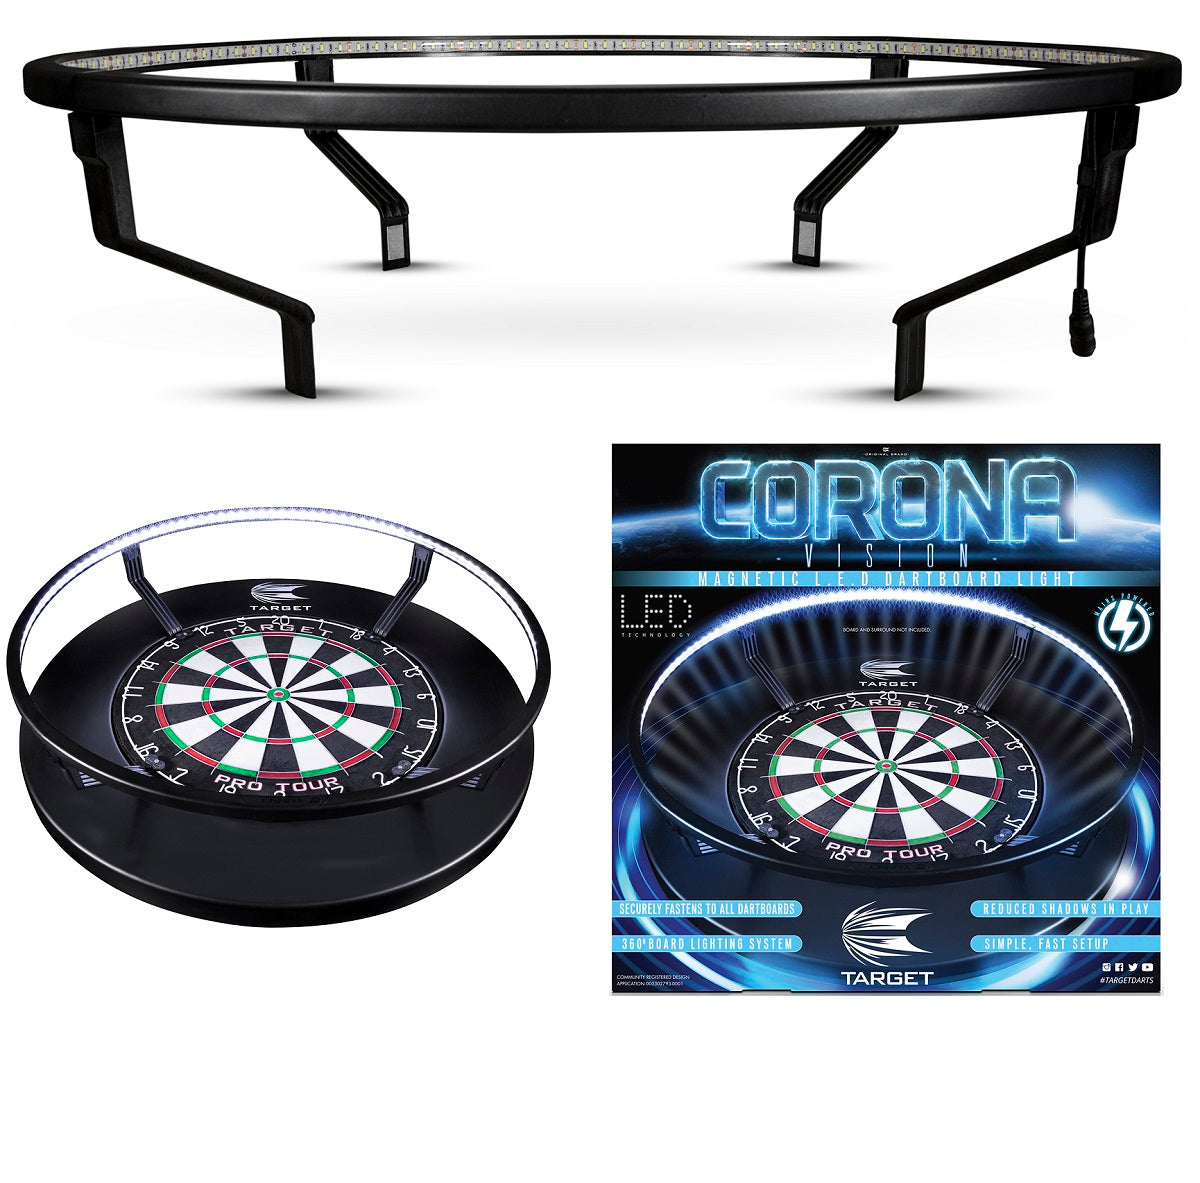 Target Vision 360 LED No Shadow Lighting System For Dartboard Surround